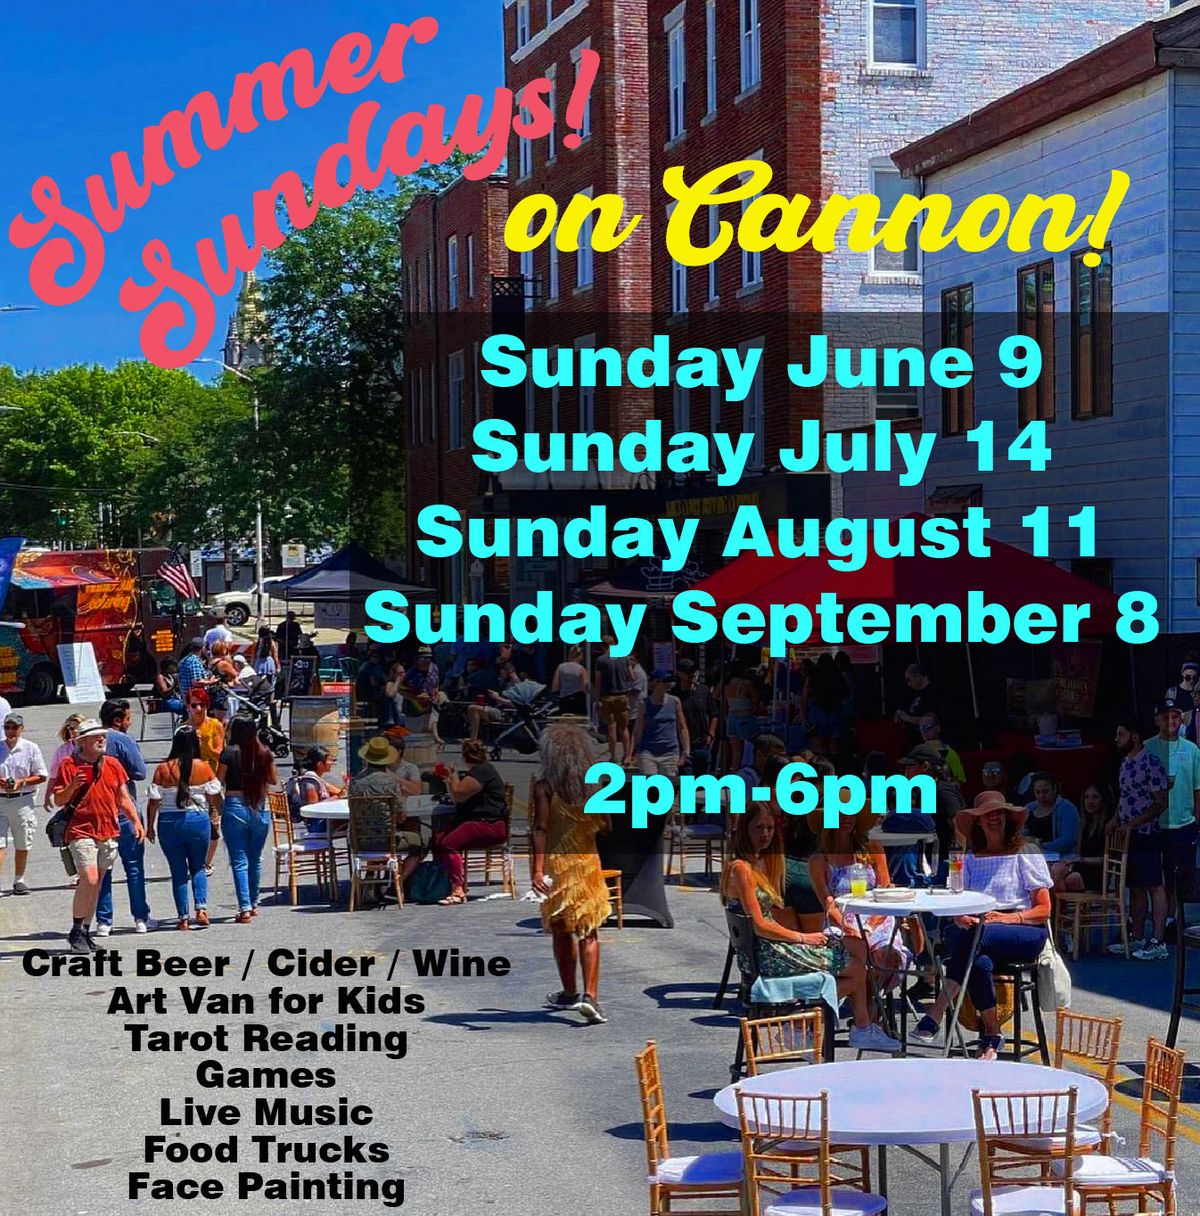 Summer Sundays on Cannon!  Block Party!  Live Music & More!